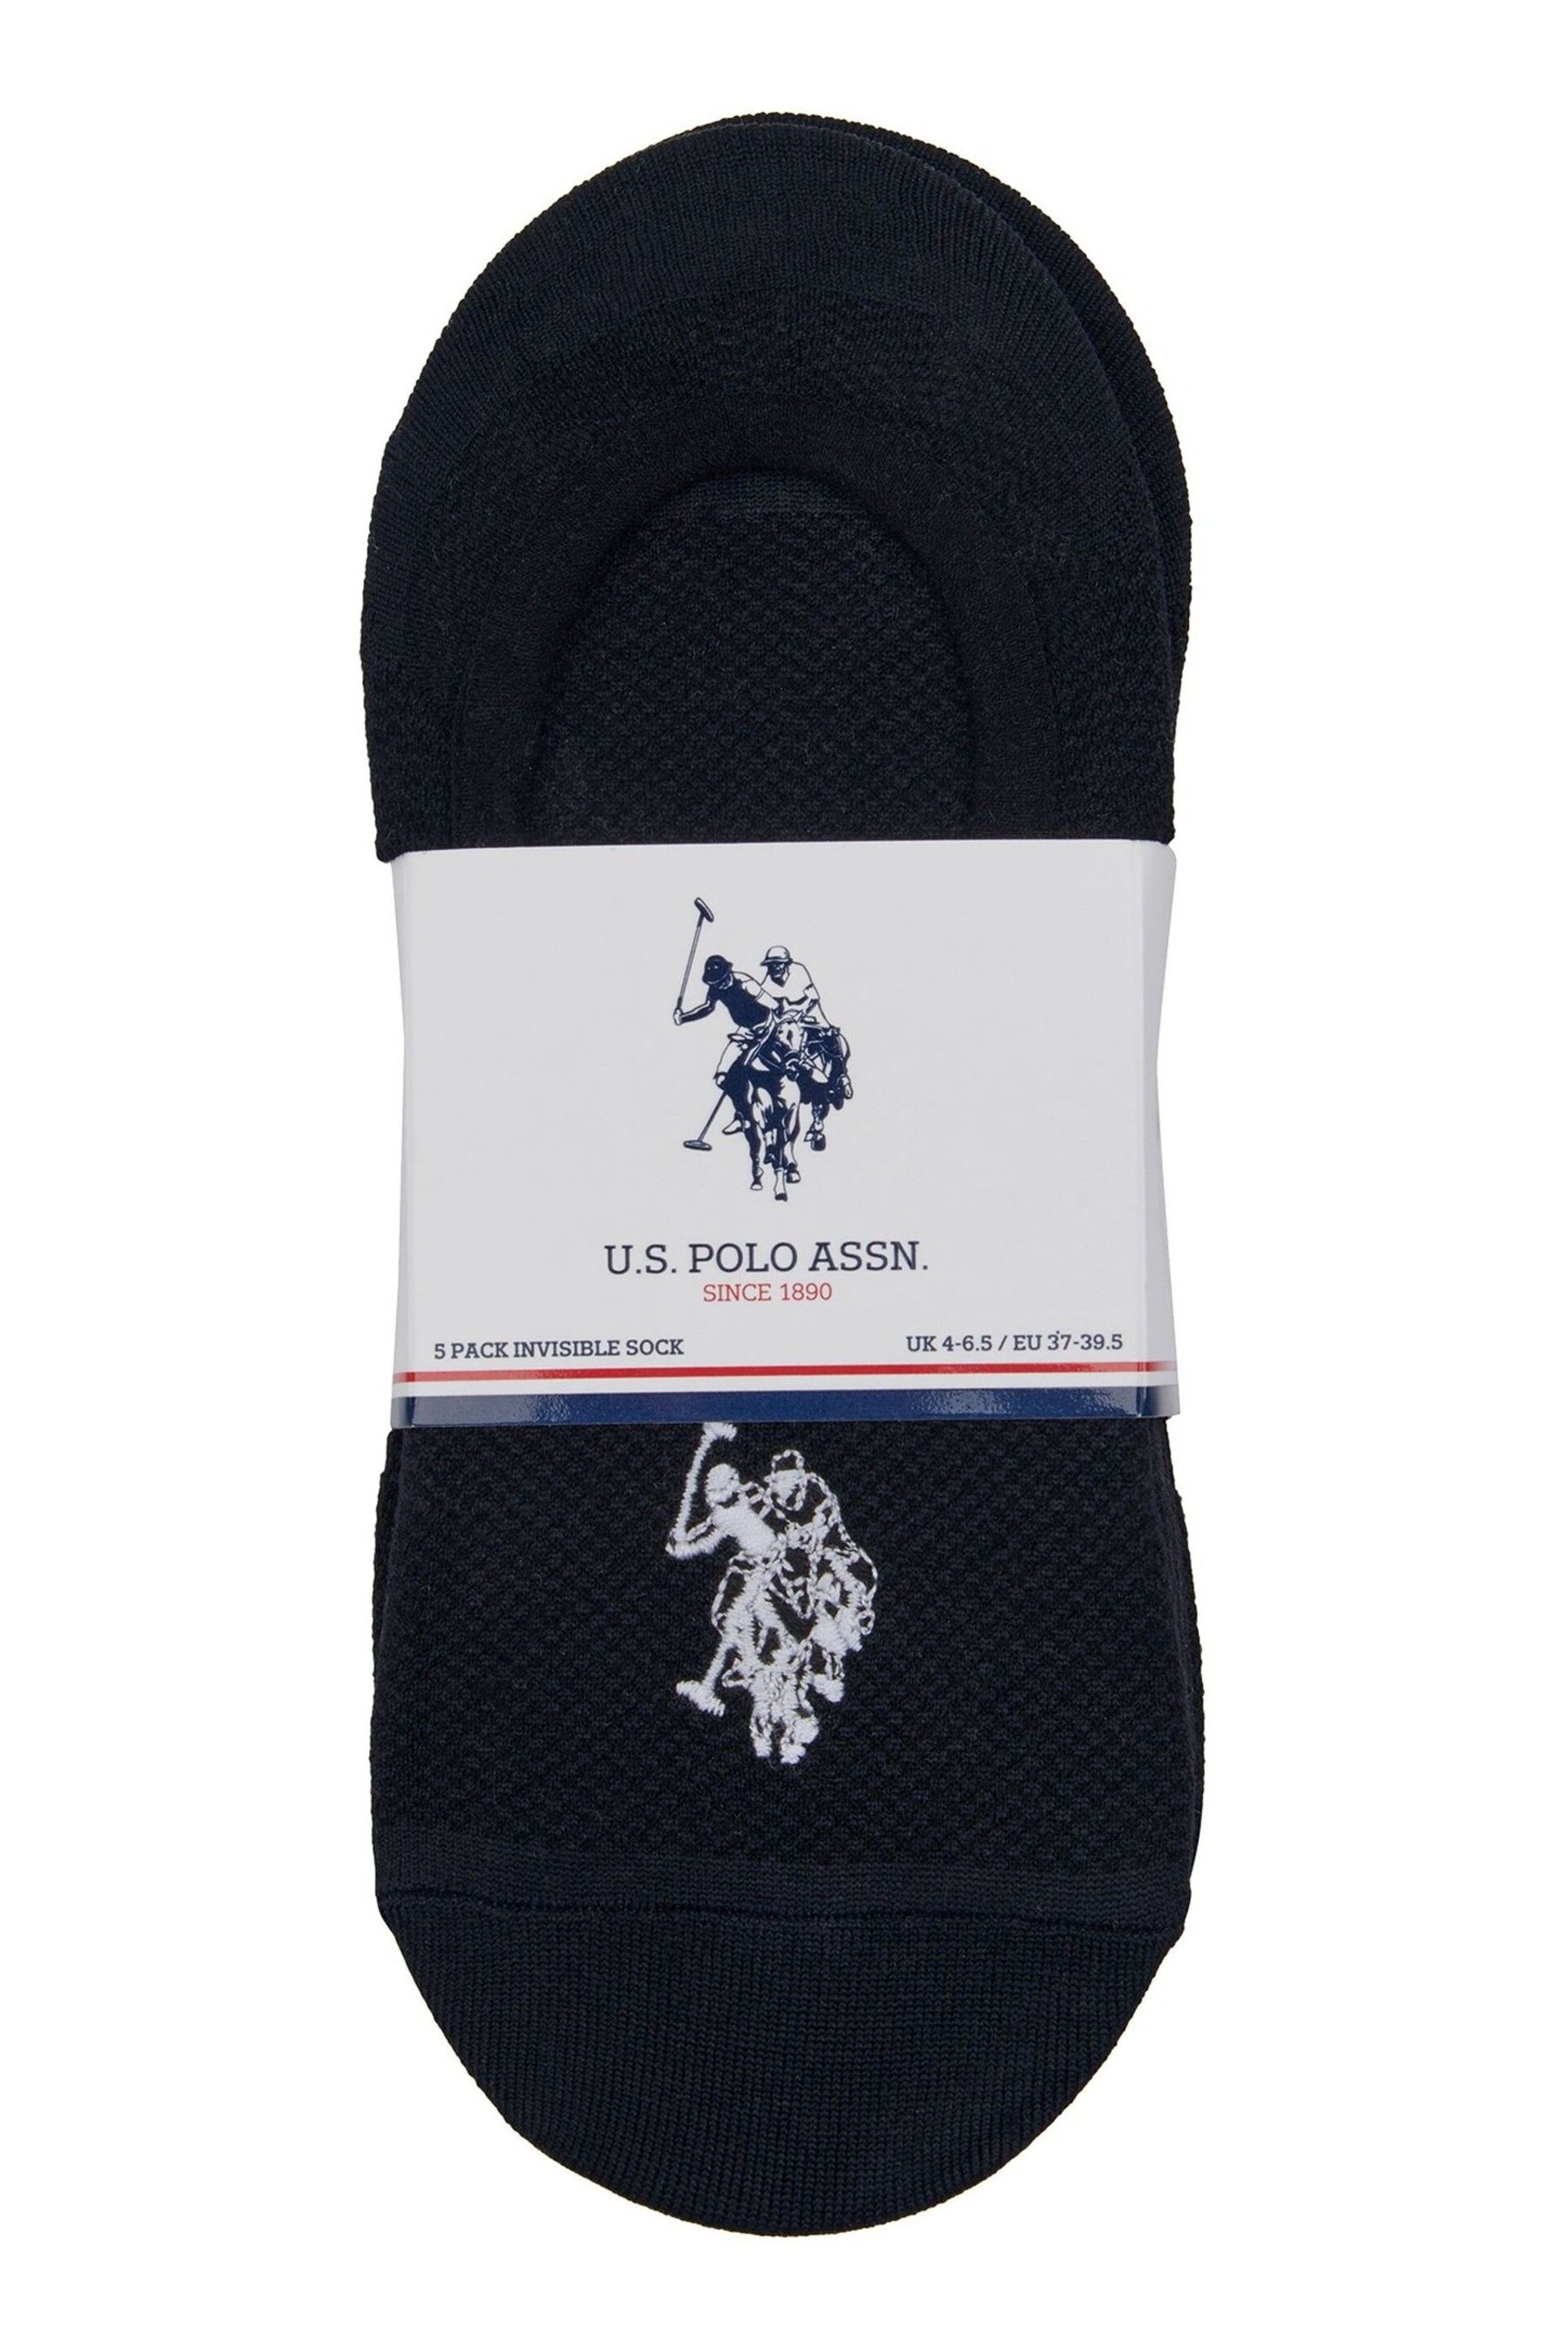 U.S. Polo Assn. Invisible Trainers Socks 5 Pack - Image 2 of 3